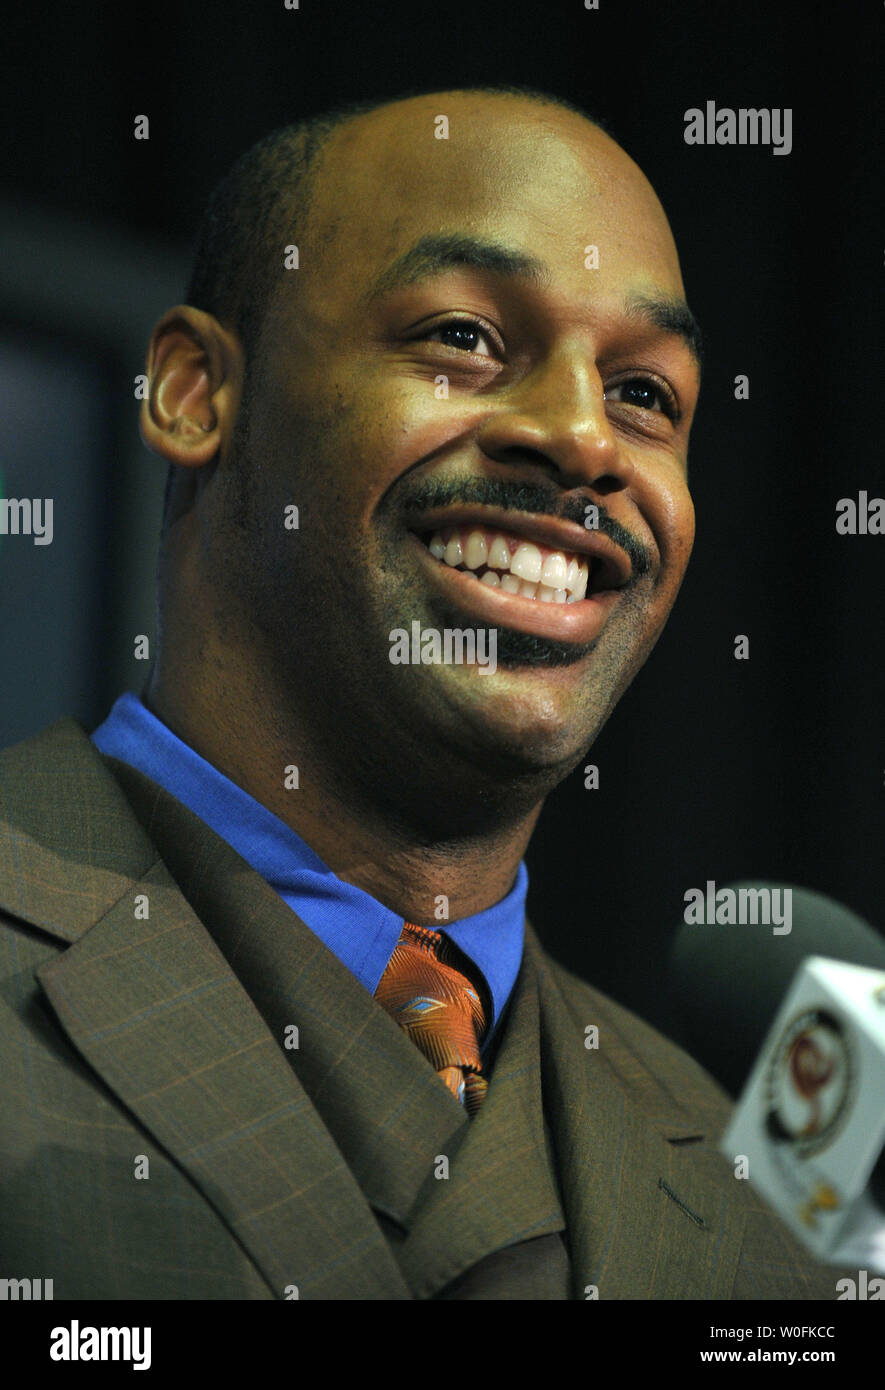 Washington Redskins new quarterback Donovan McNabb speaks to the media after being introduced by head coach Mike Shanahan, at a press conference at Redskins Park in Ashburn, Virginia on April 6, 2010. The Philadelphia Eagles traded McNabb to the Washington Redskins for a pair of draft picks in the upcoming NFL draft. UPI/Kevin Dietsch Stock Photo